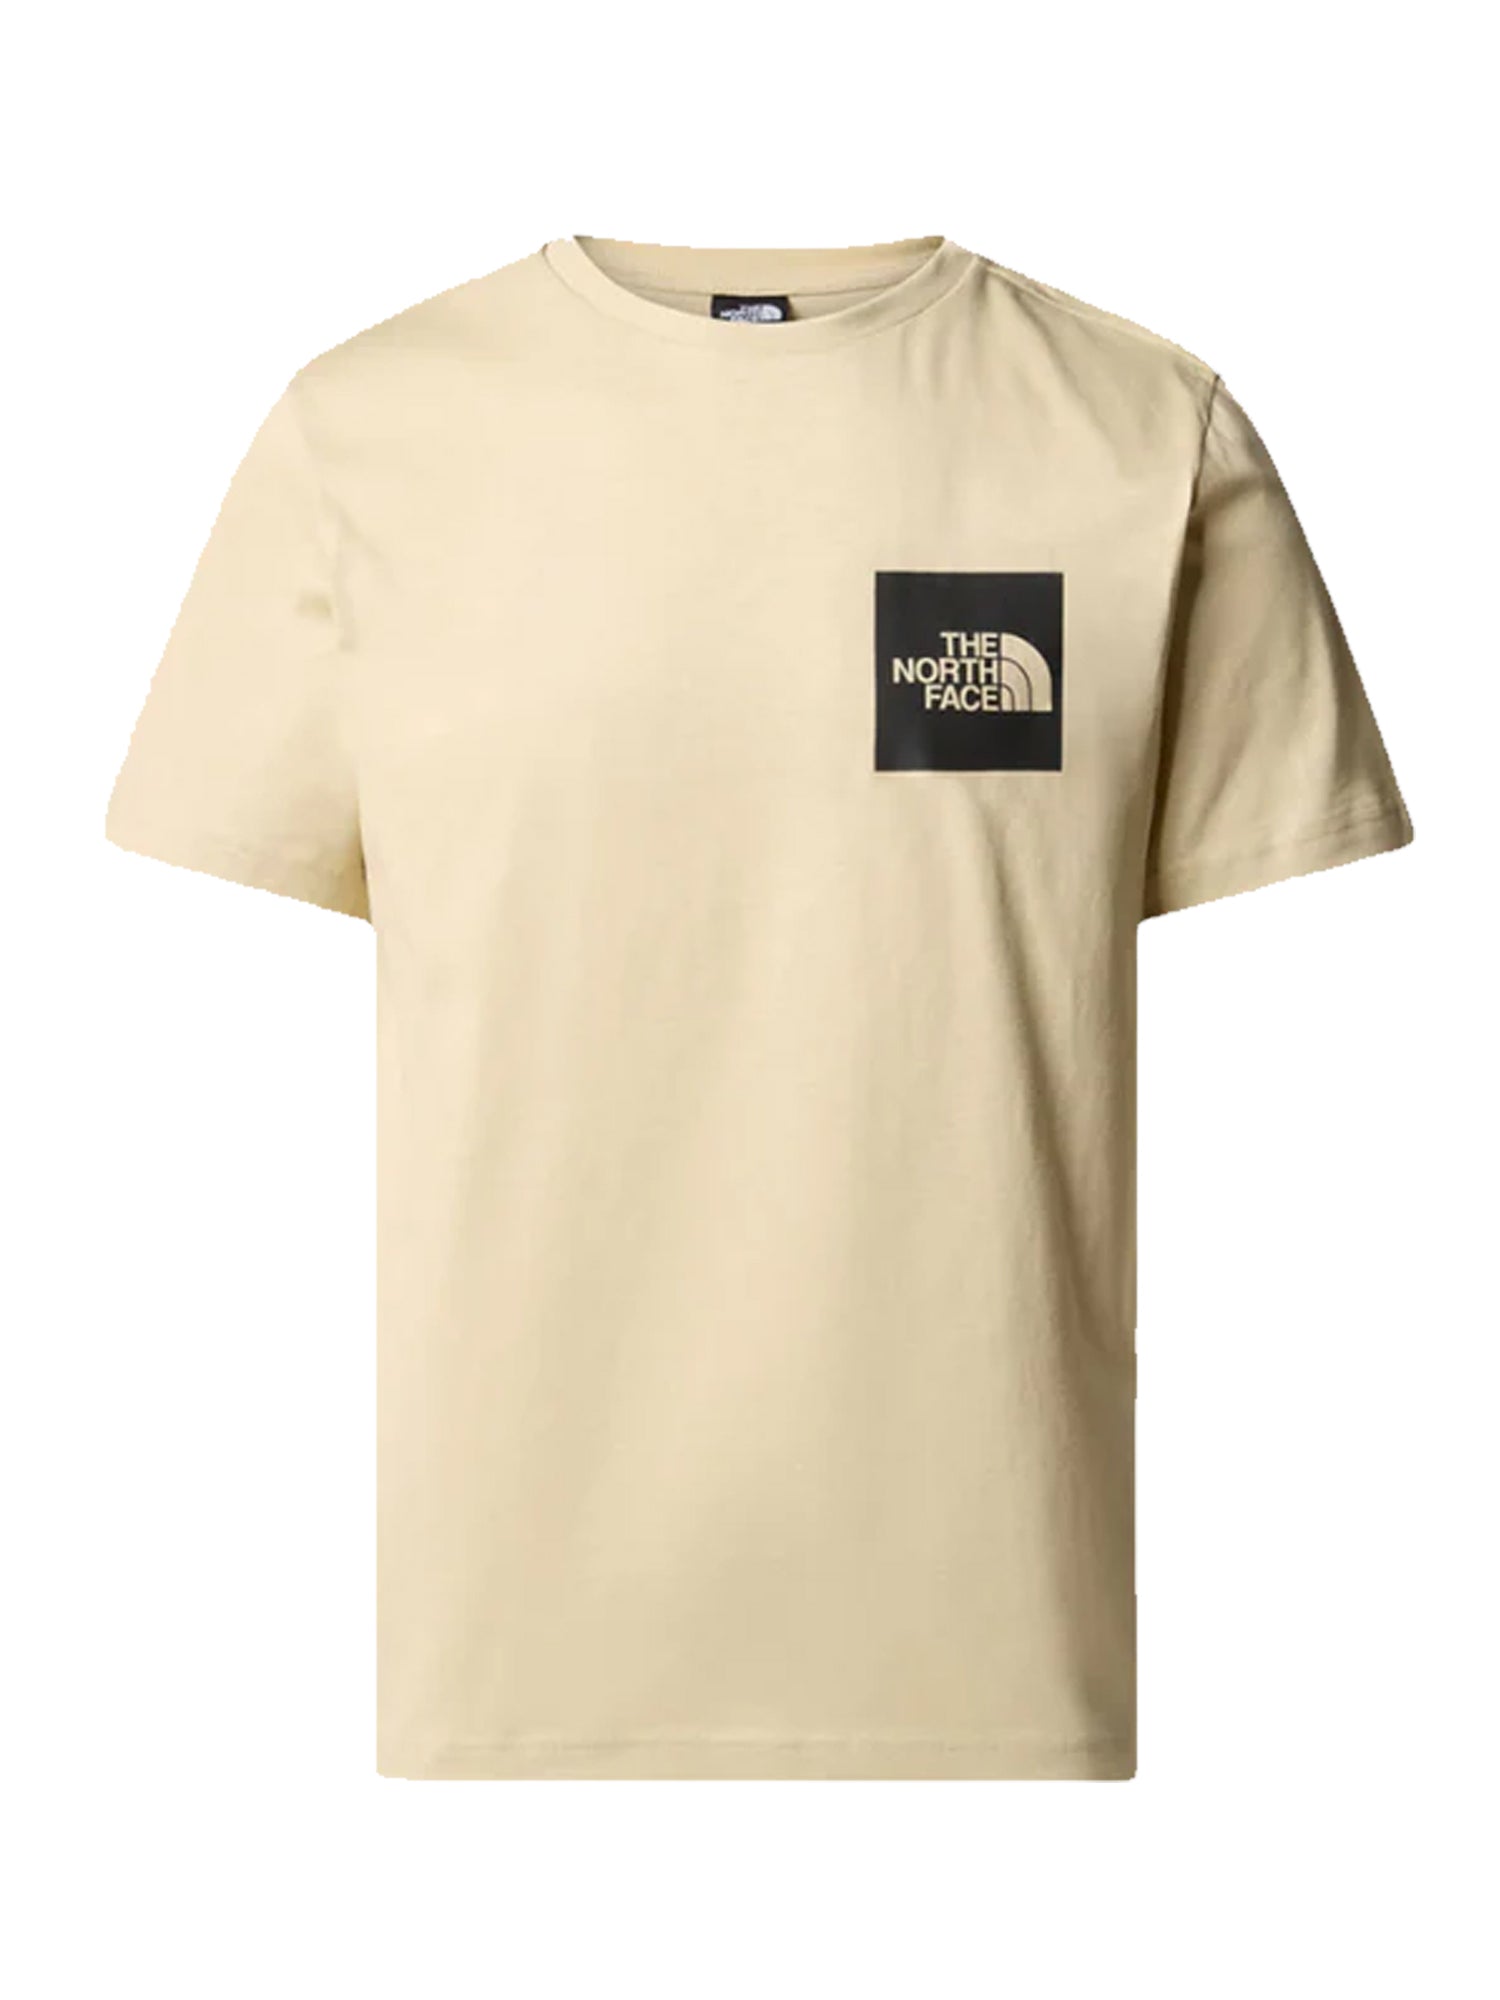 THE NORTH FACE T-SHIRT S/S FINE BEIGE